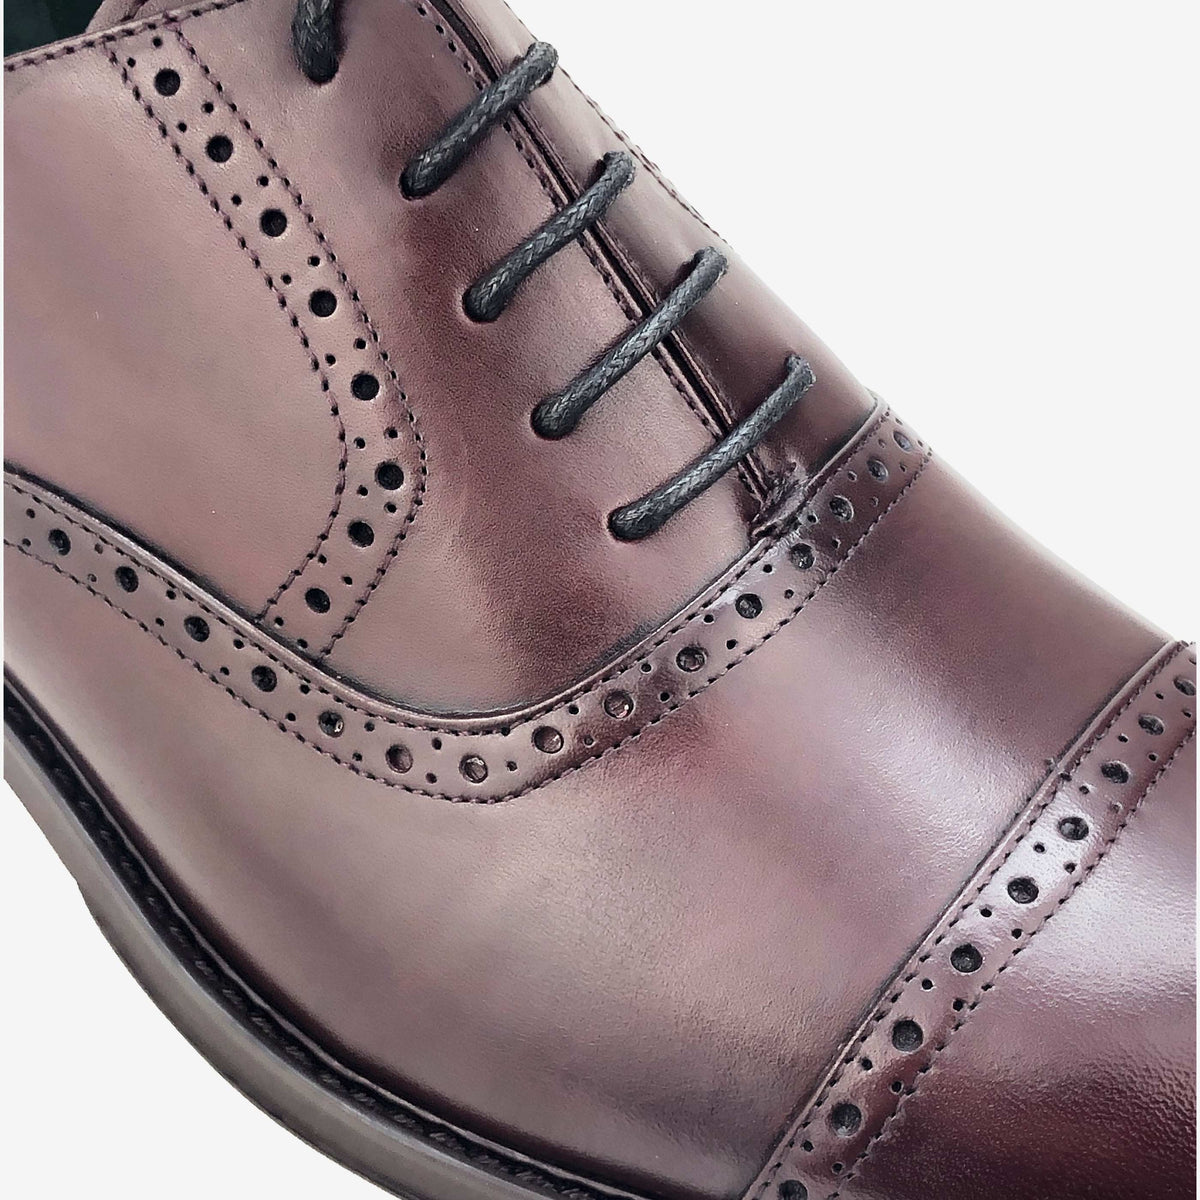 CH01-019  - Chaussure Cuir Bordeaux - deluxe-maroc